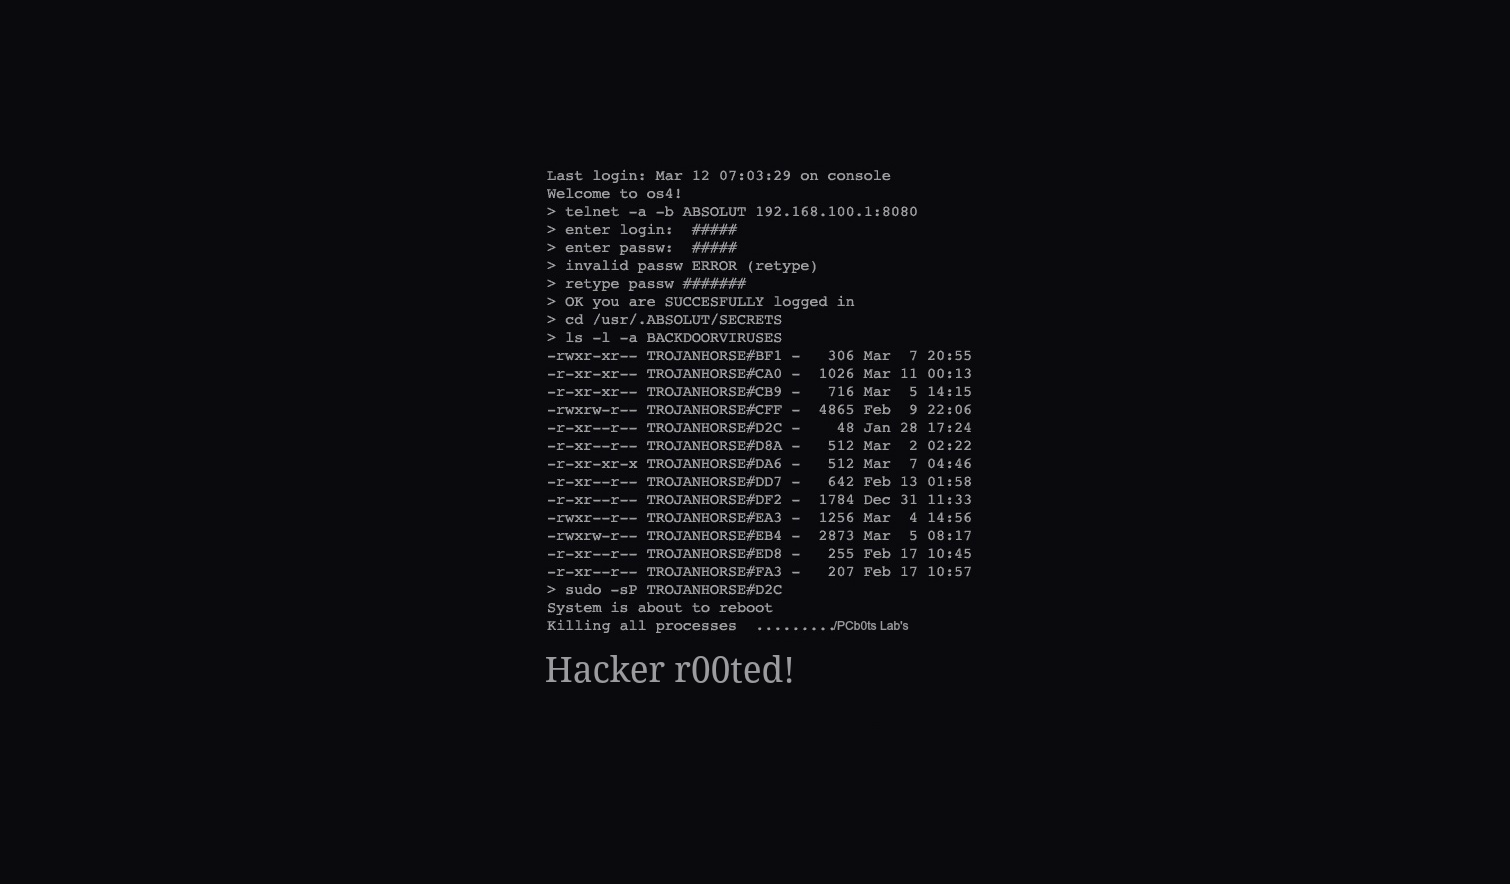 Best HD Hackers Wallpapers Part VI - Wanna Be hacker Tricks and other